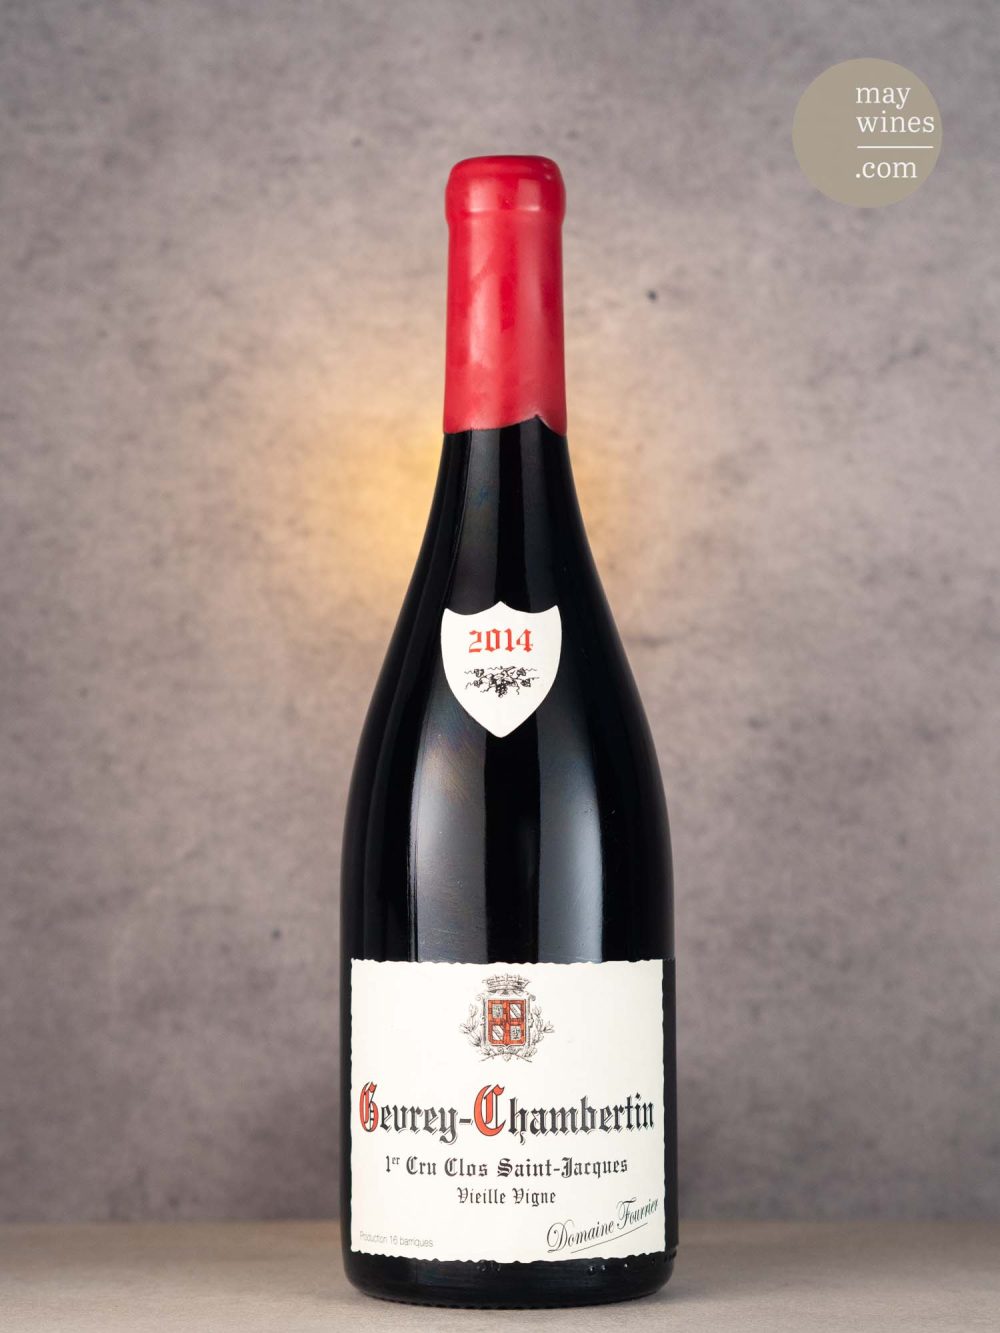 May Wines – Rotwein – 2014 Clos St. Jacques Premier Cru - Domaine Fourrier